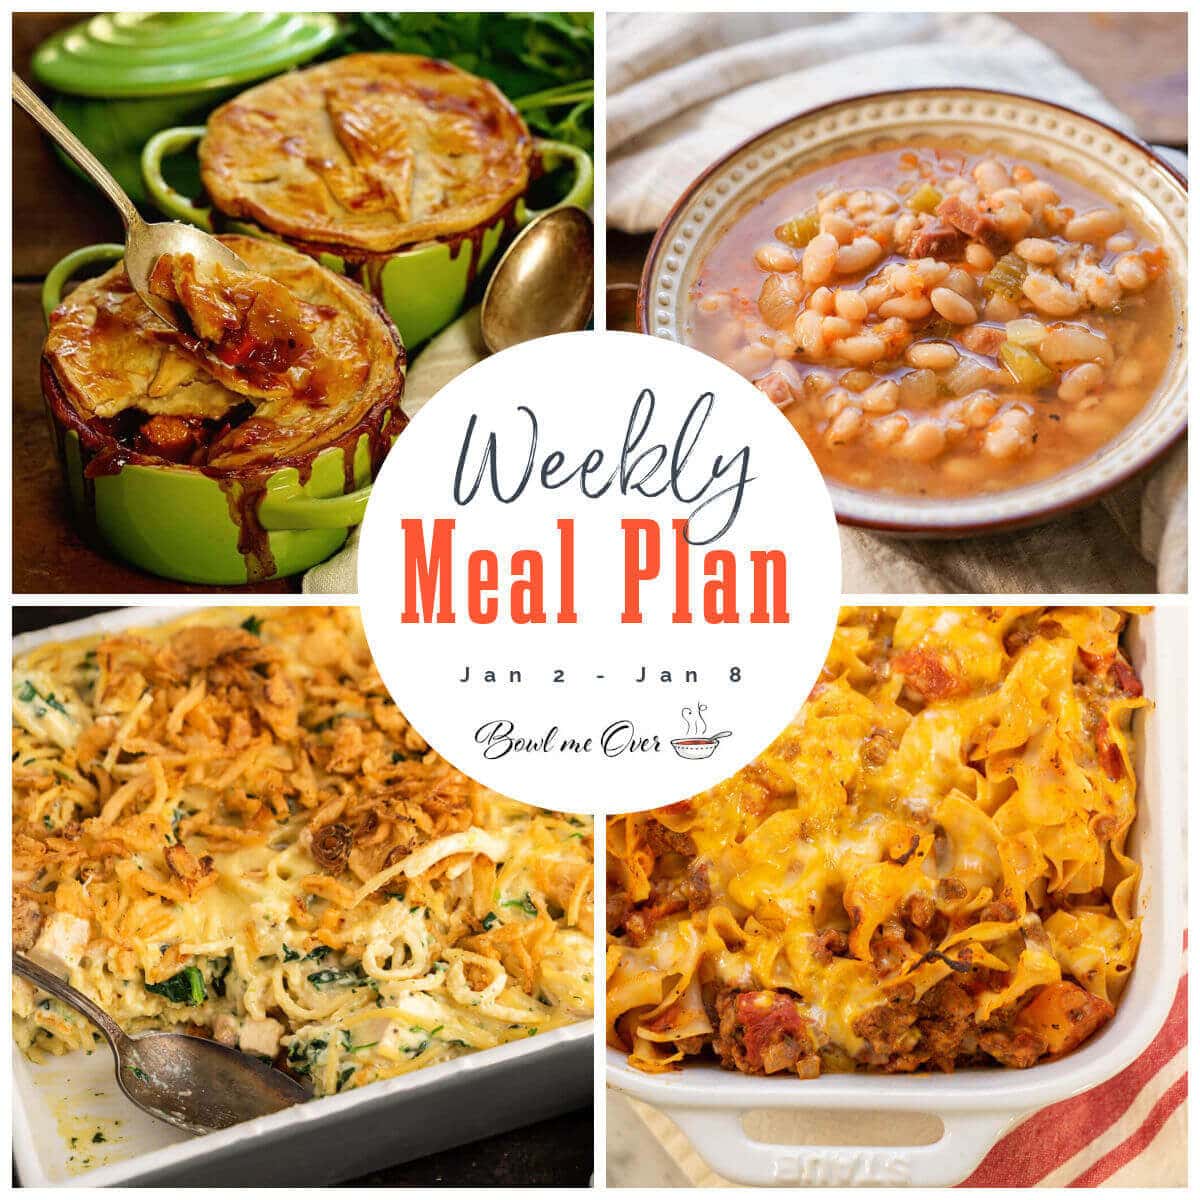 Collage of photos for weekly meal plan 1 with casseroles and soups. With print overlay.